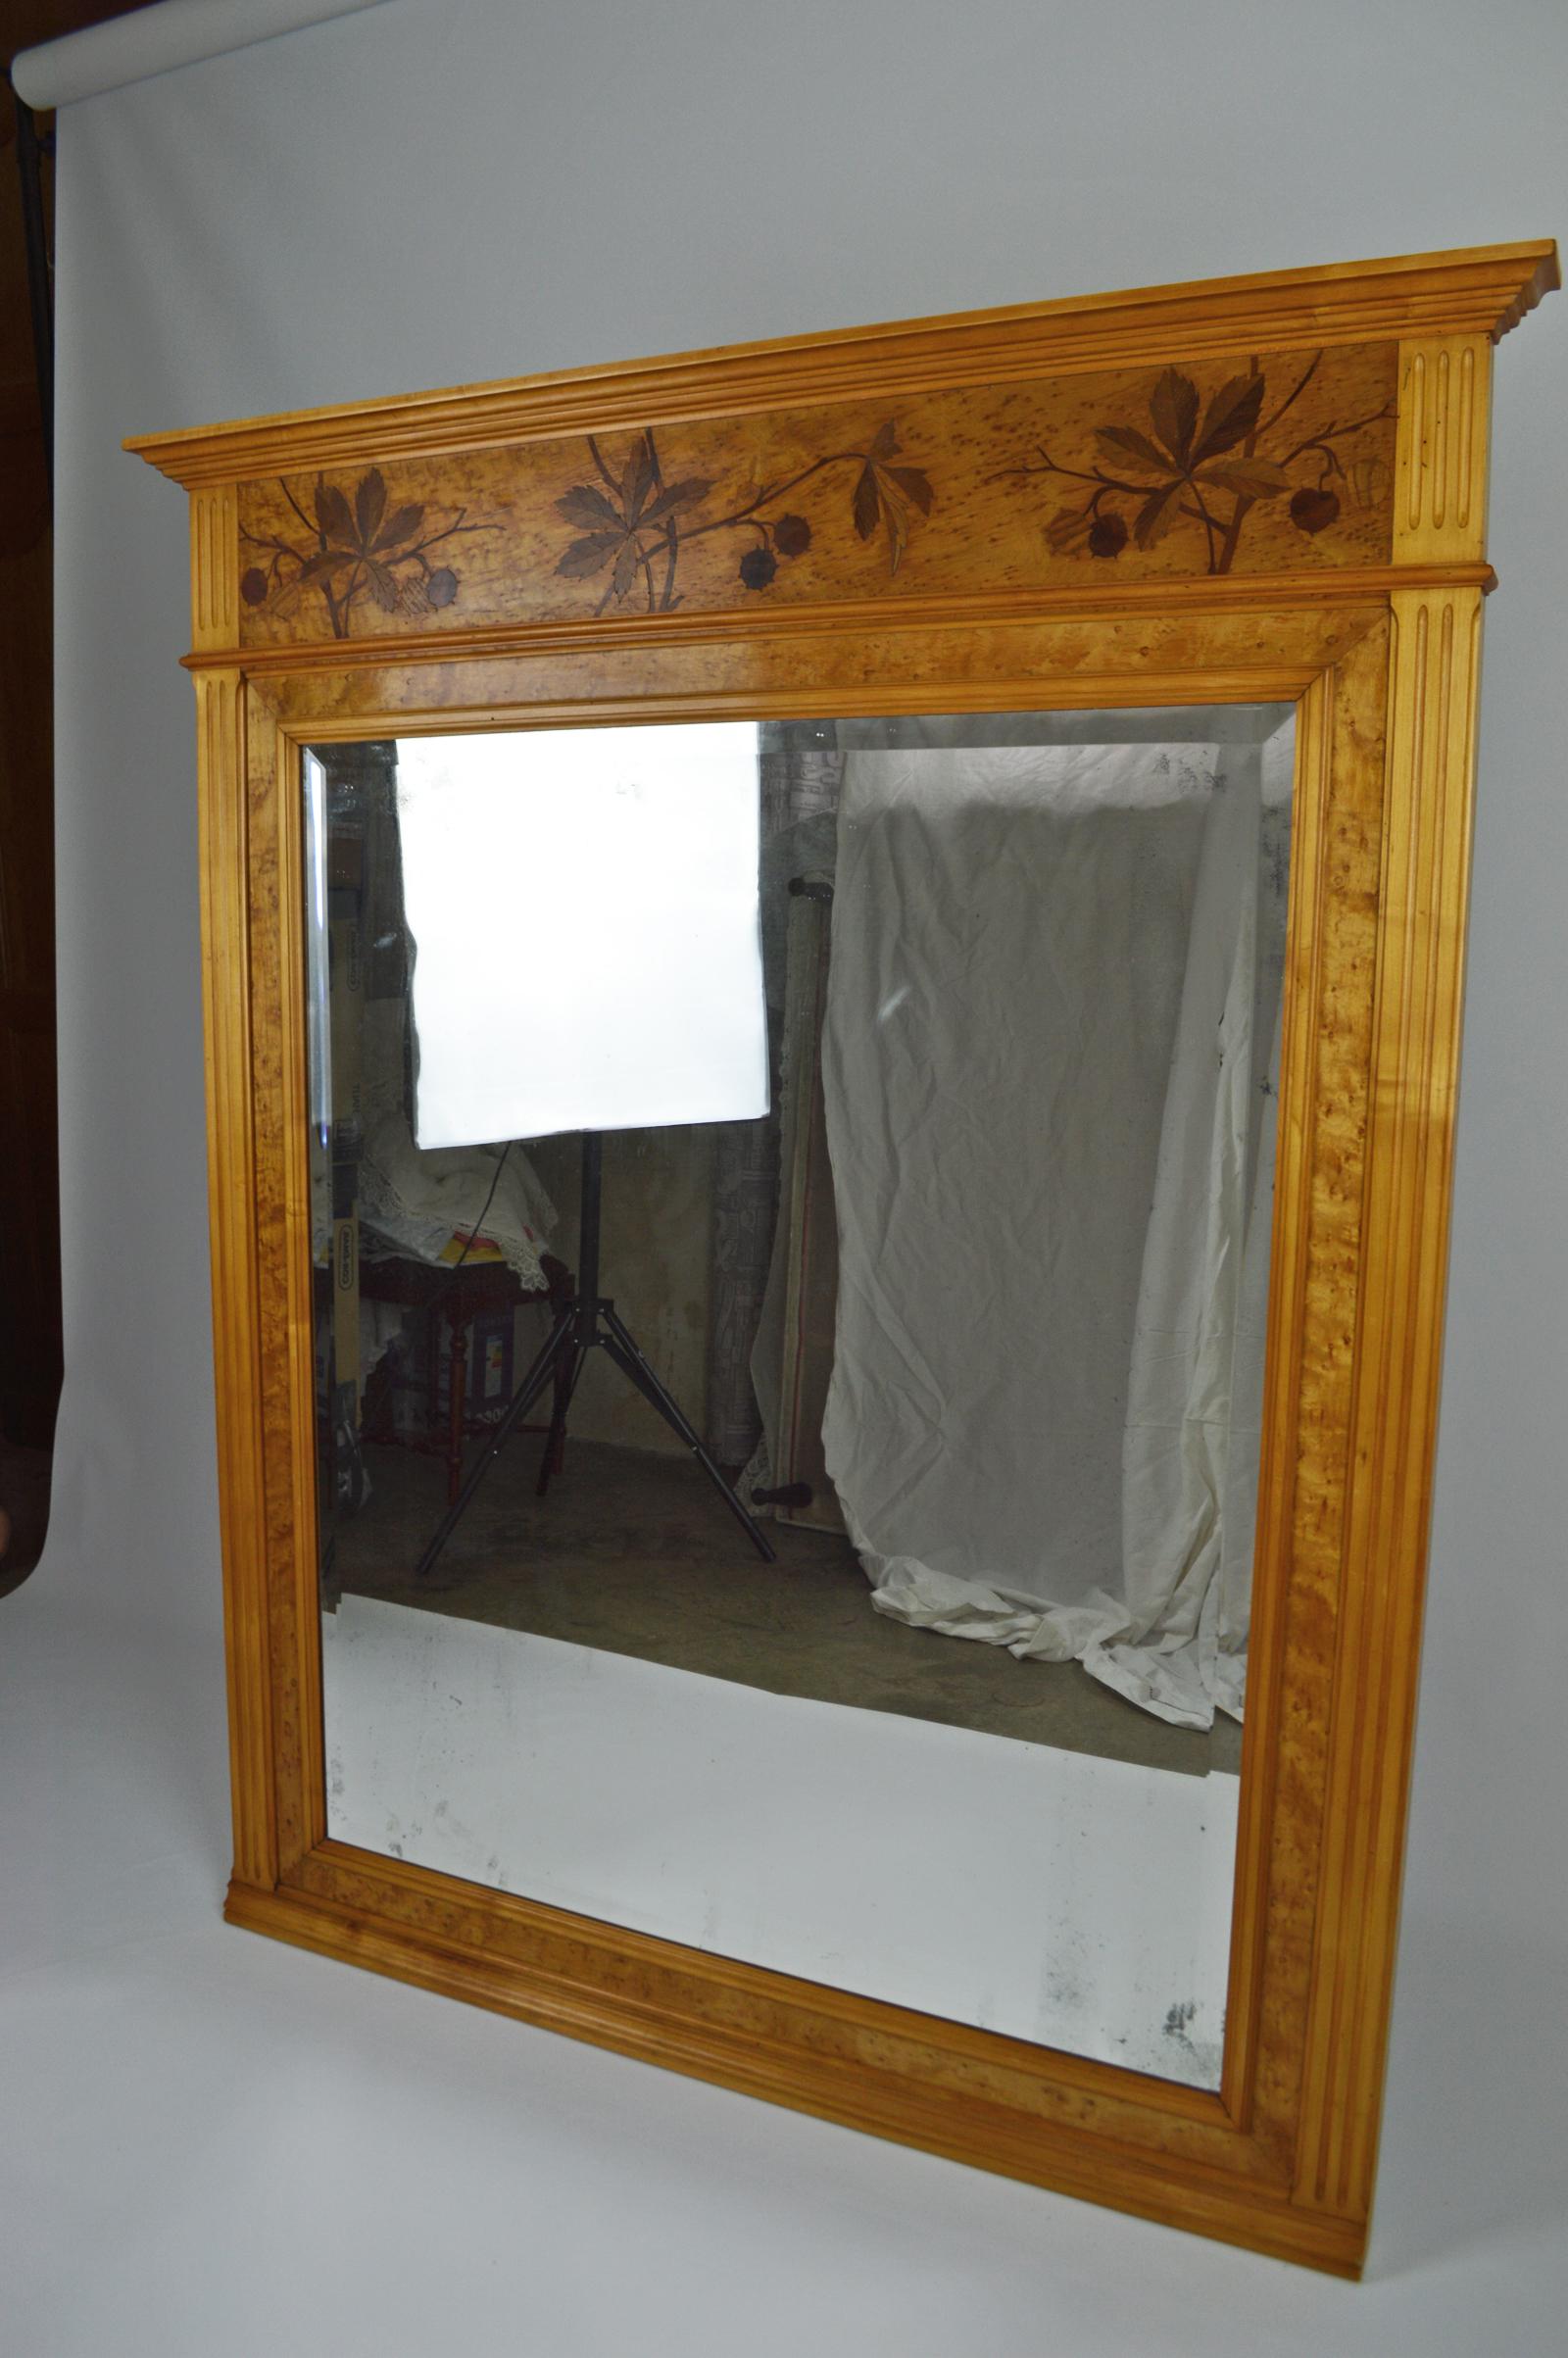 Early 20th Century French Art Nouveau Inlaid Fireplace Mantel Mirror, Horse-Chestnut Theme, 1900s For Sale